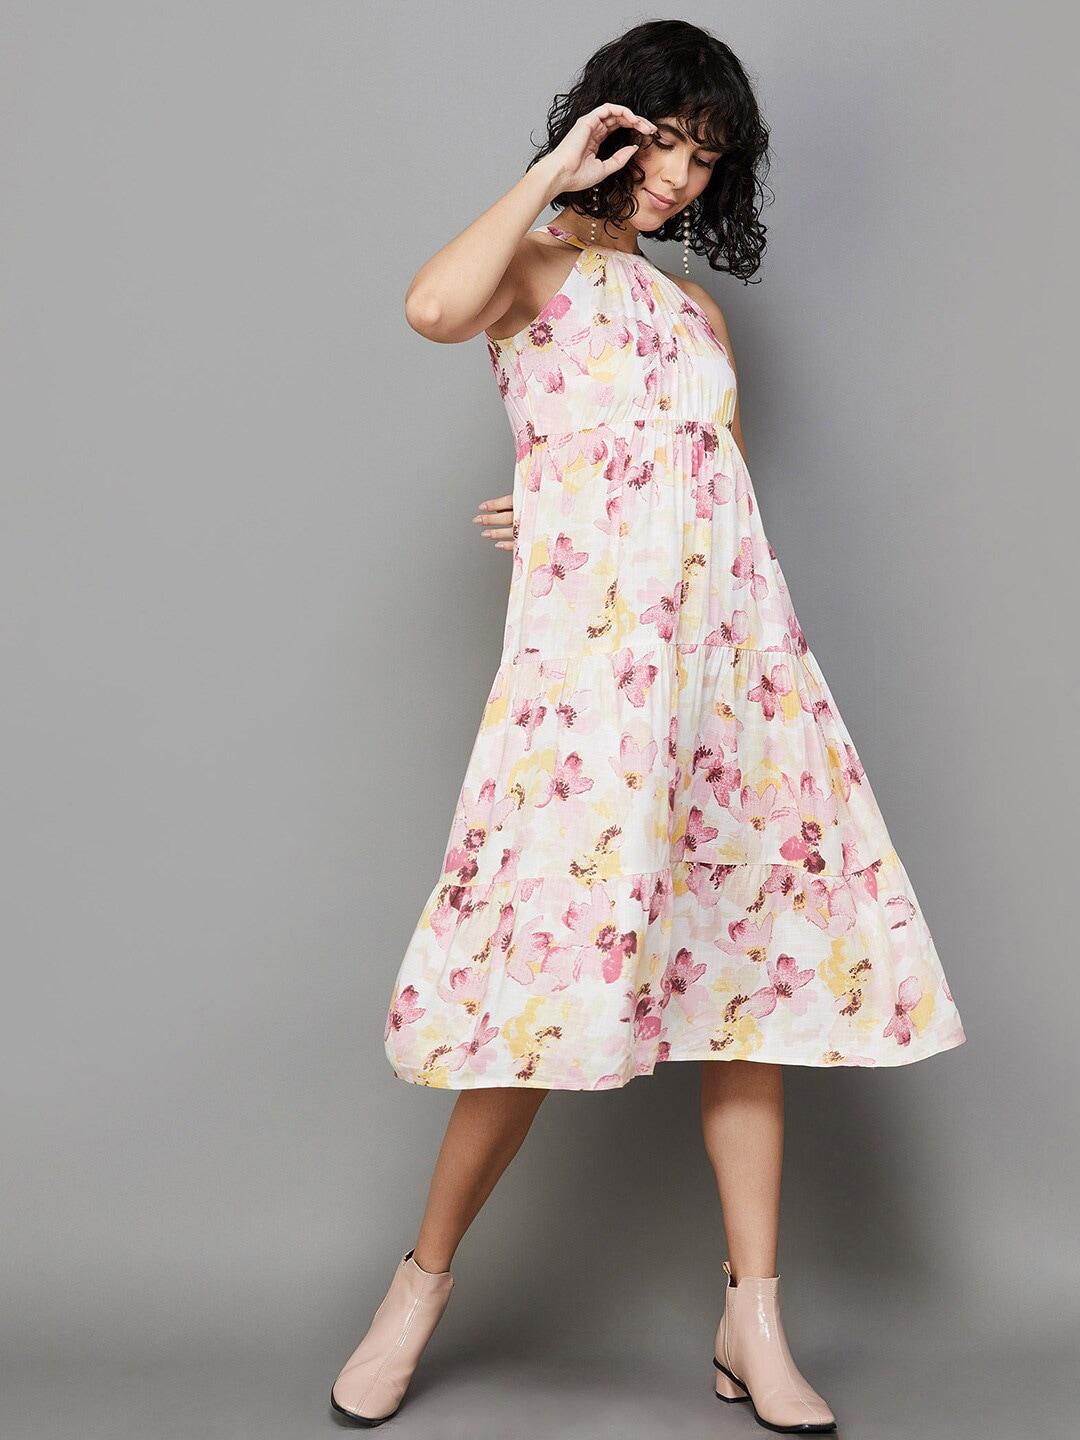 ginger-by-lifestyle-floral-printed-halter-neck-fit-and-flare-dress